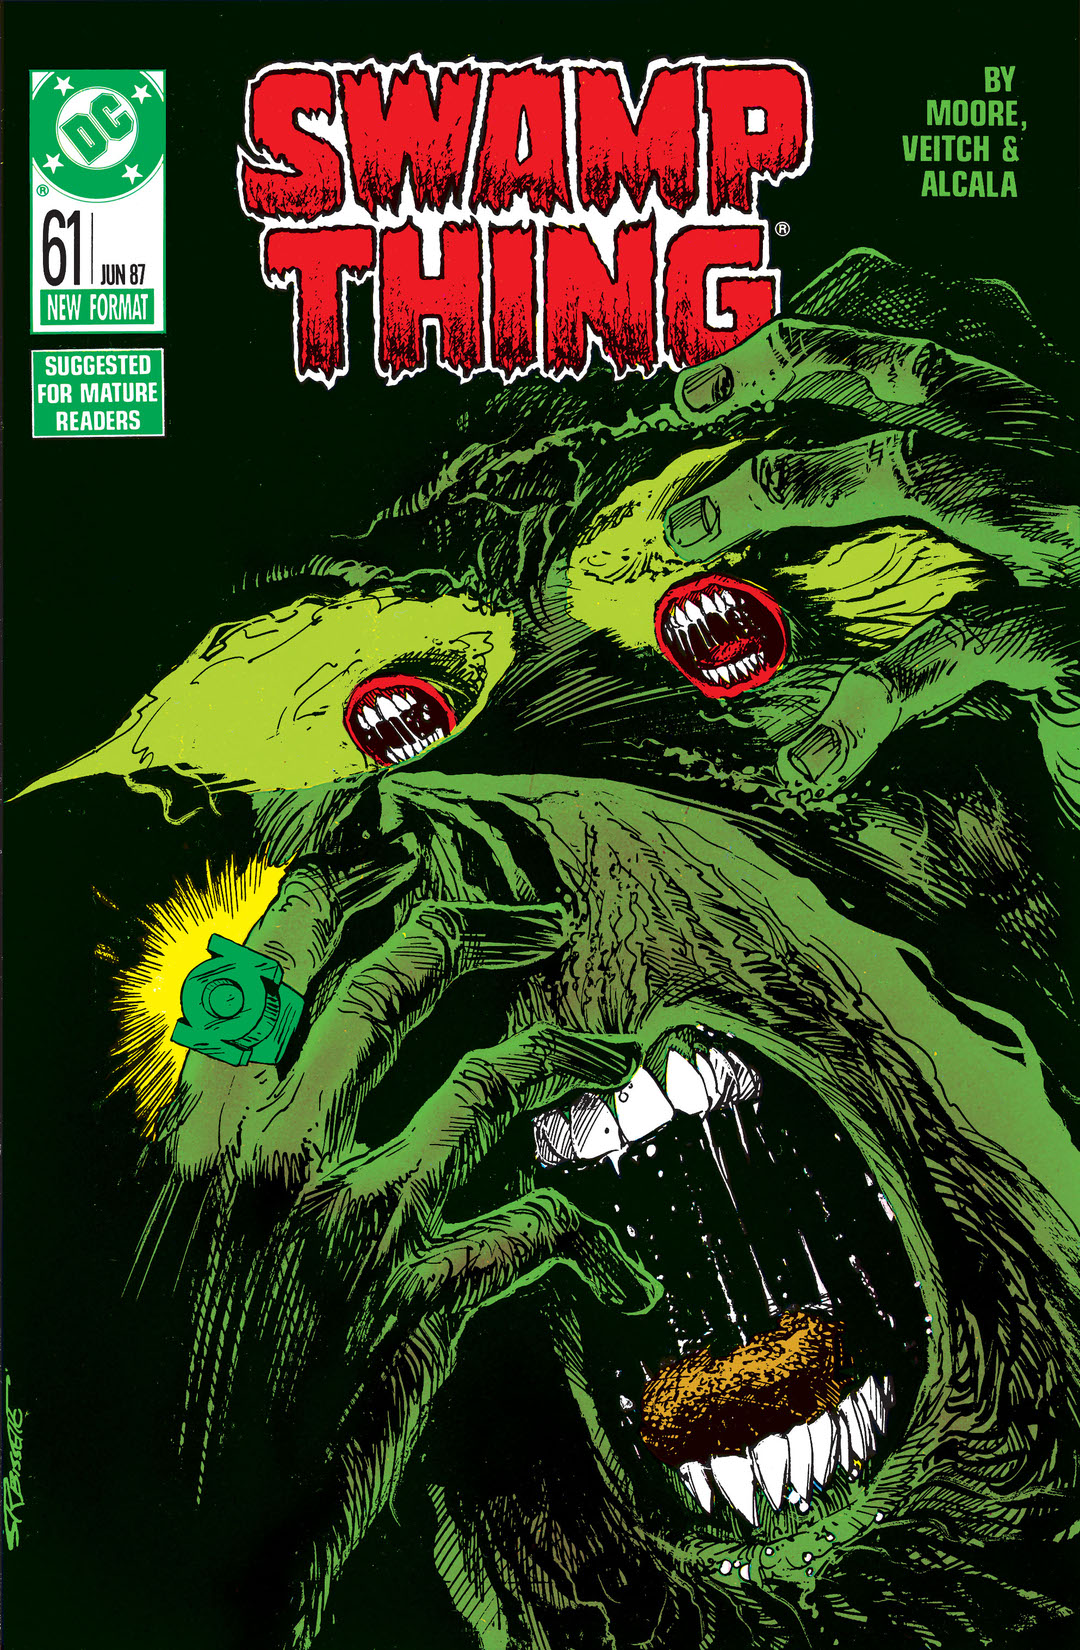 Swamp Thing (1985-) #61 preview images